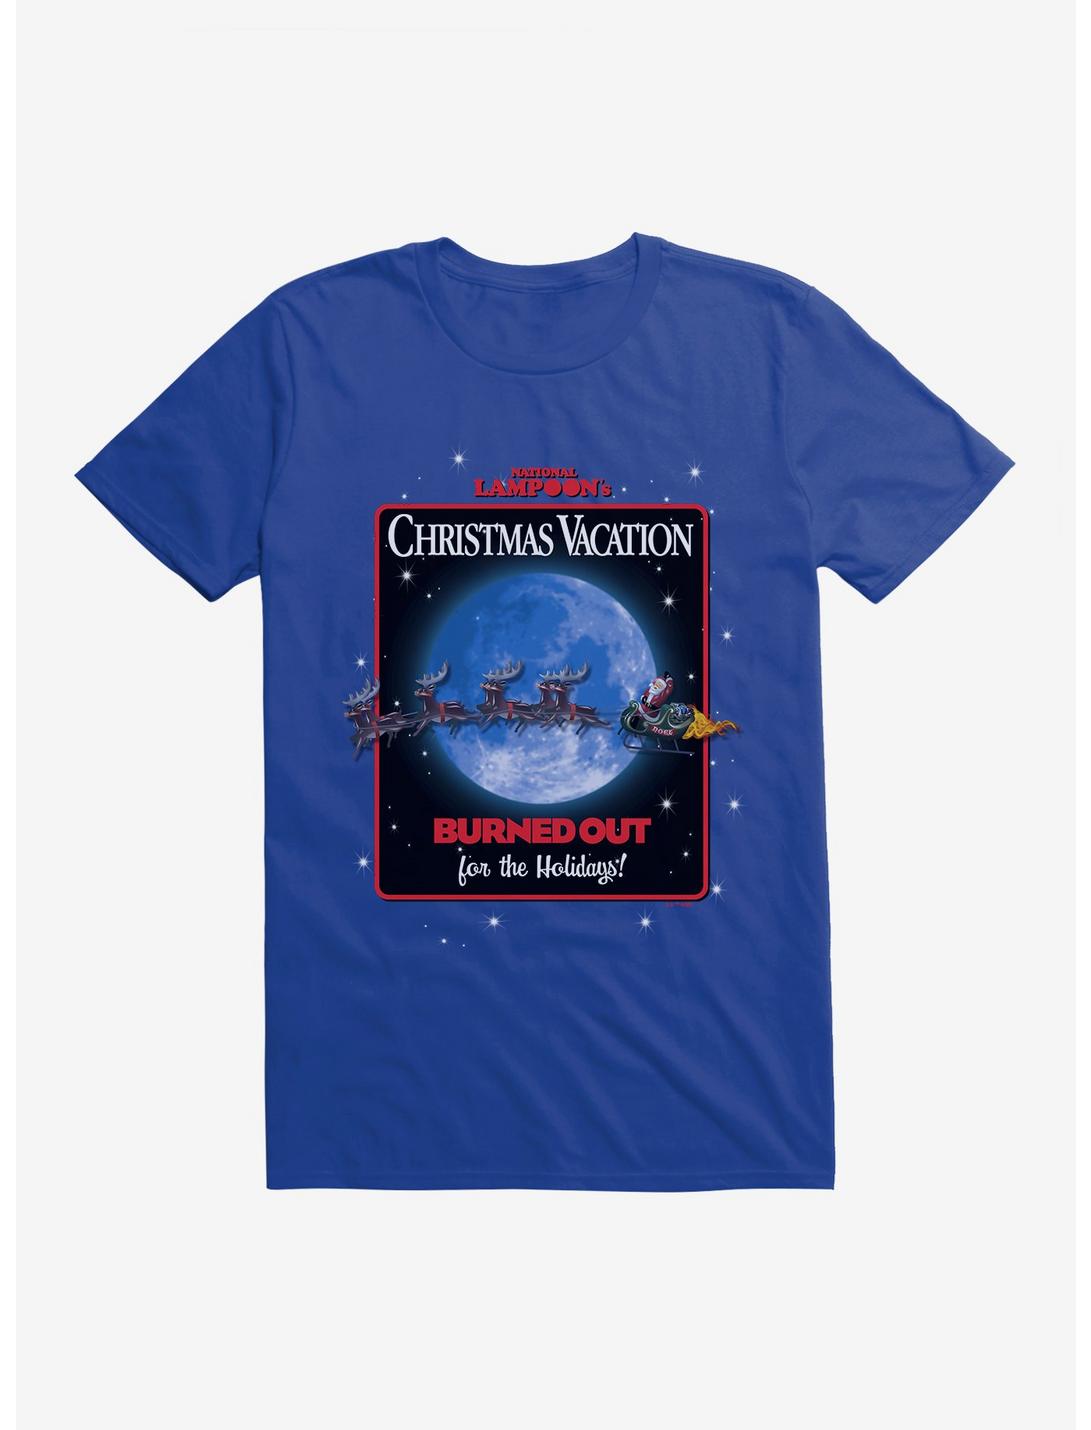 Christmas Vacation Burned Out For The Holidays! T-Shirt, , hi-res